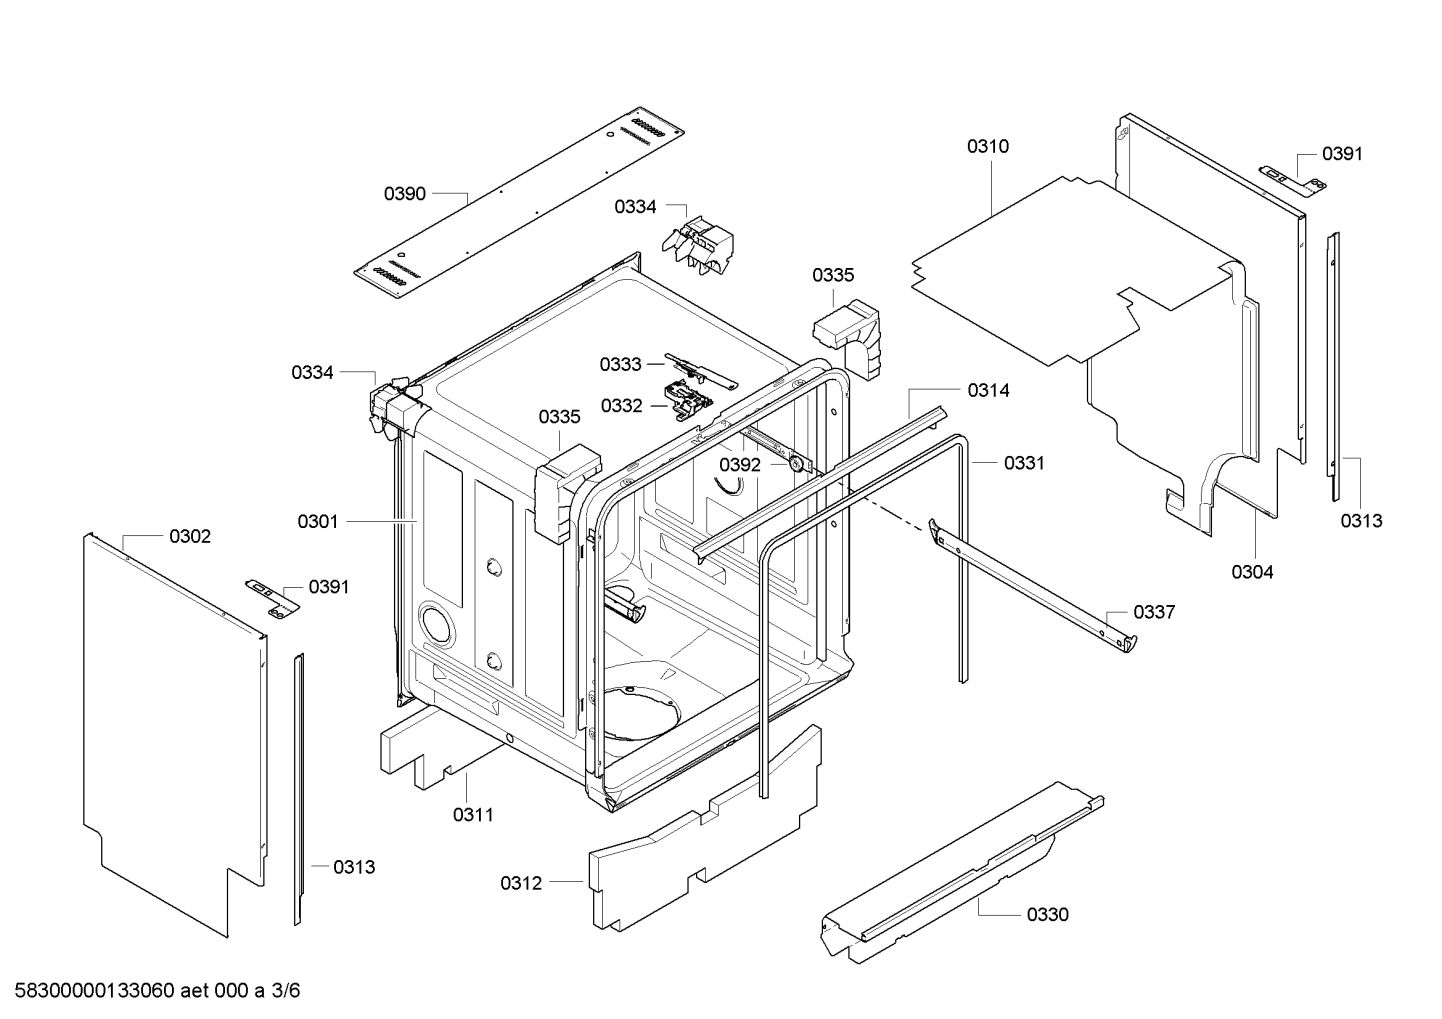 drawing_link_3_device_1638181